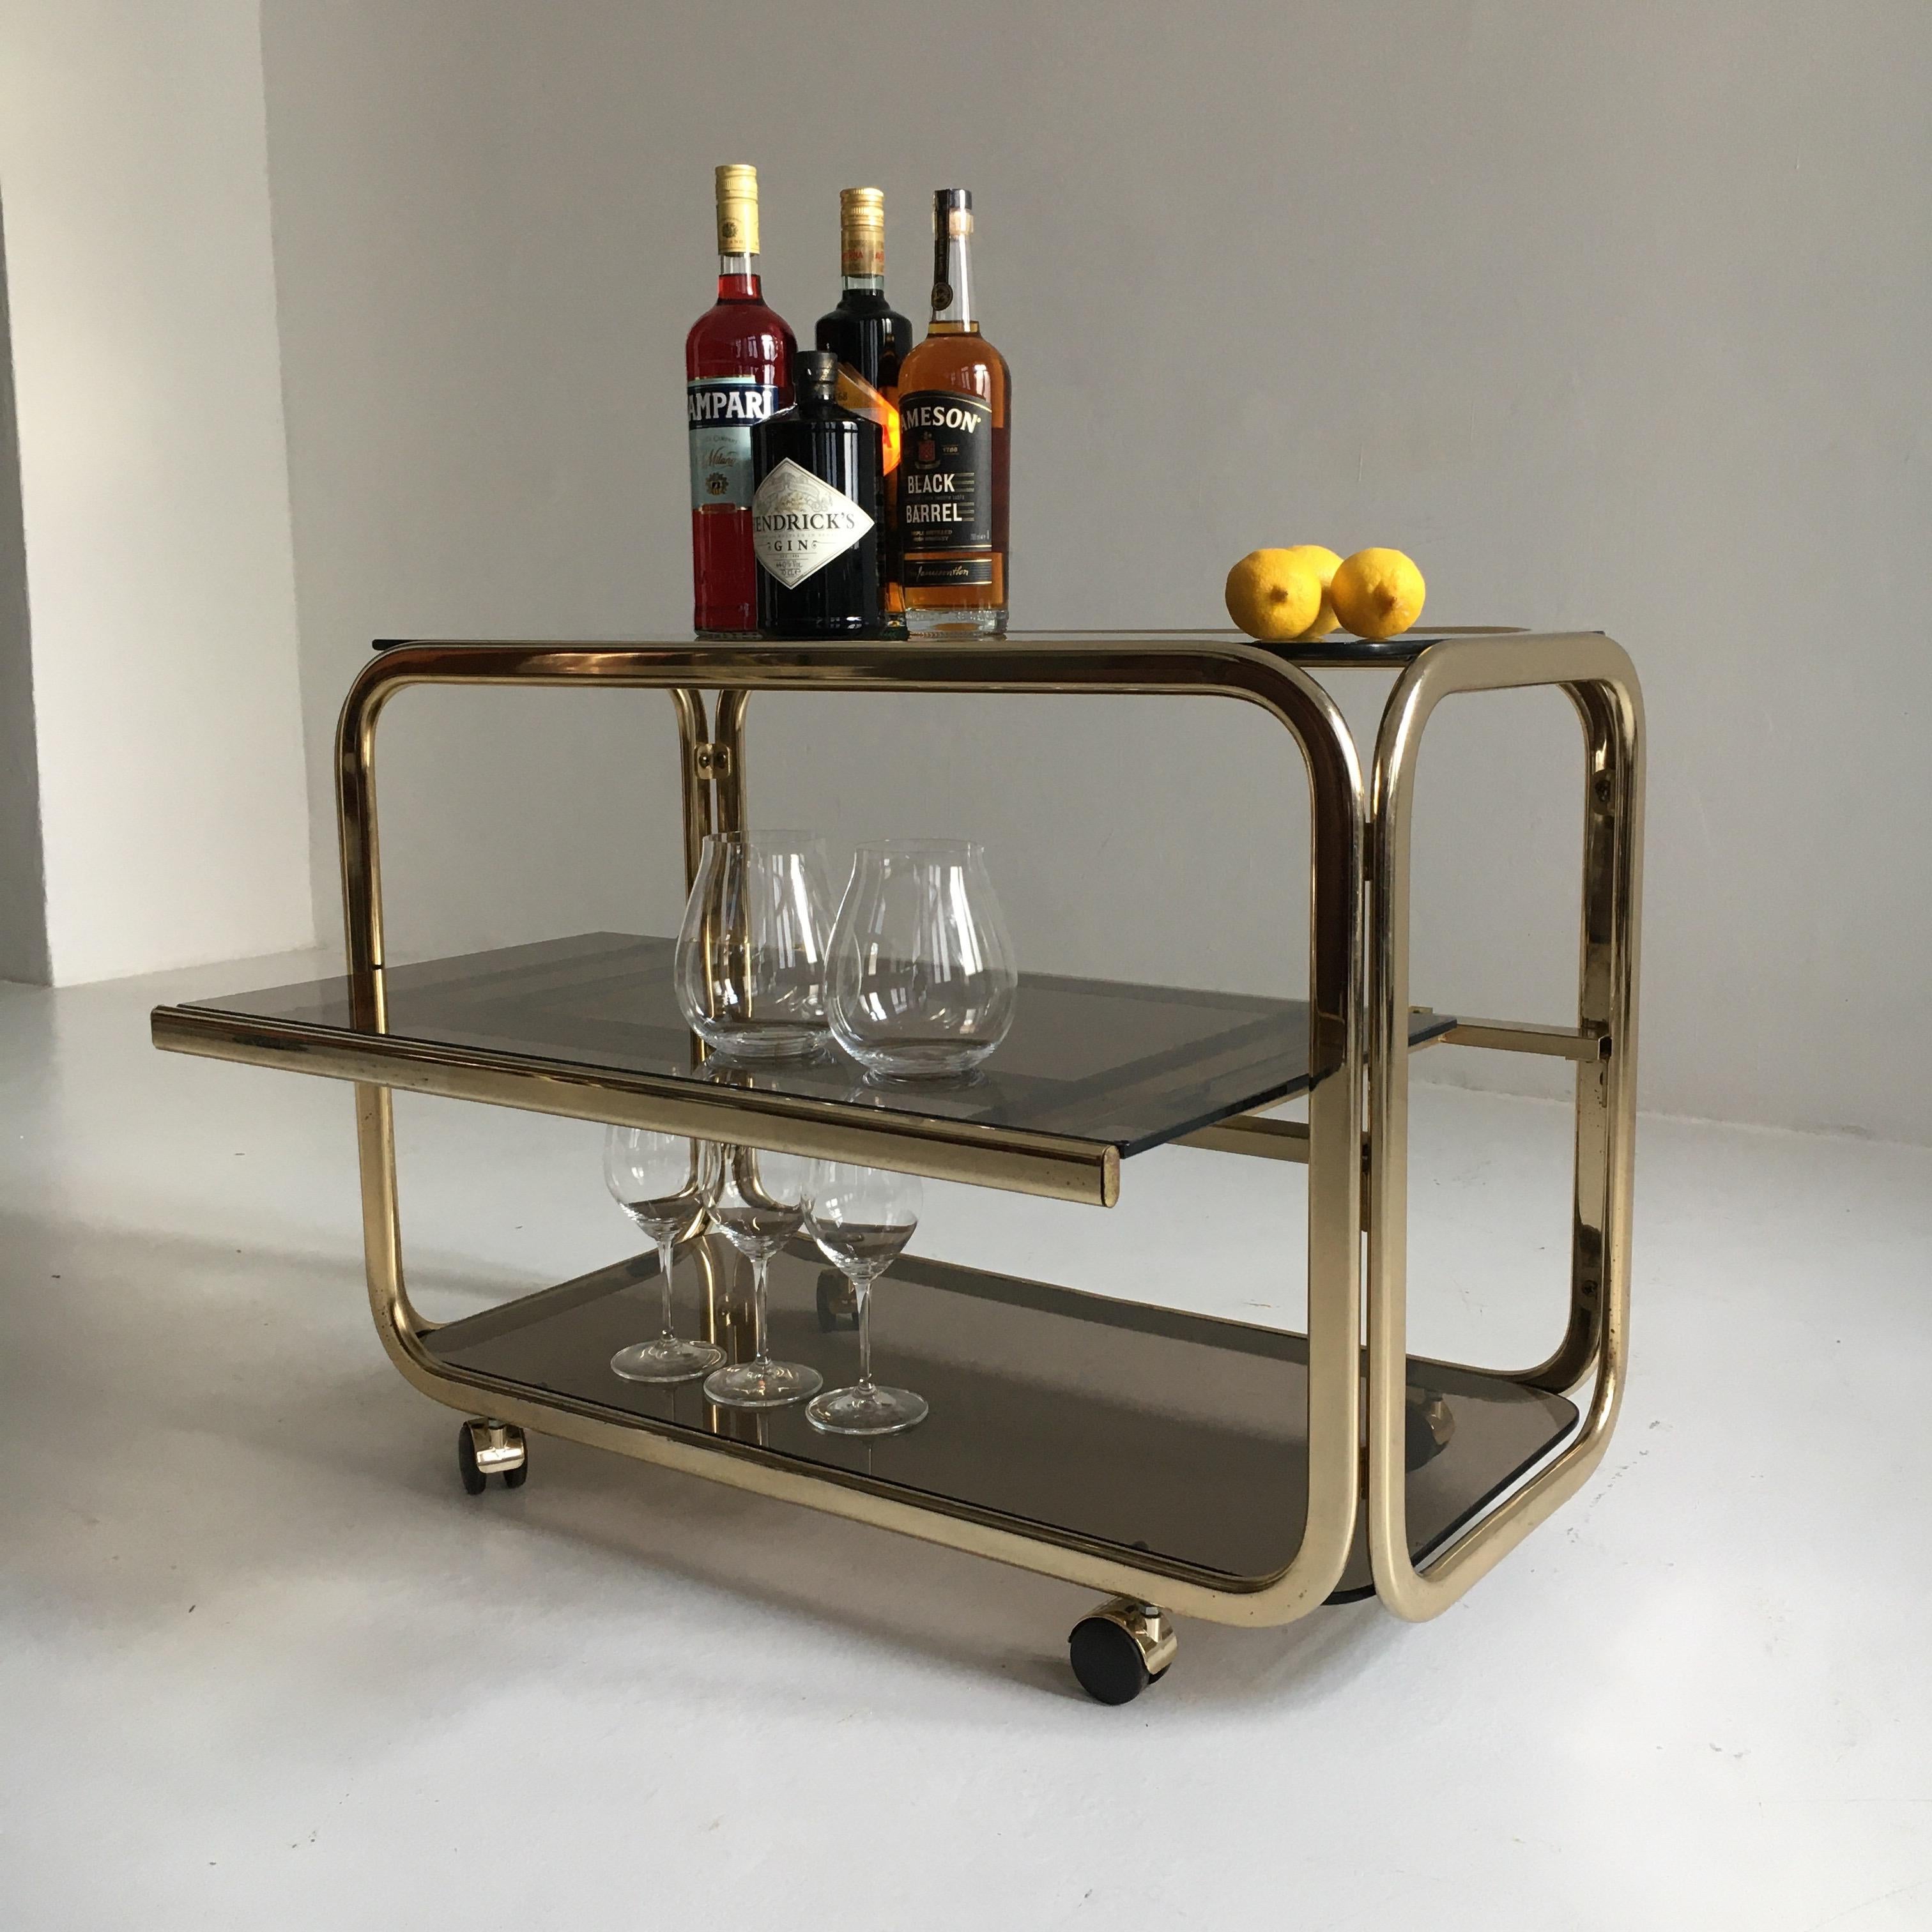 Italian Vintage Brass-Plated Bar Cart Table Brown Smoked Glass Plates by Morex, 1970s